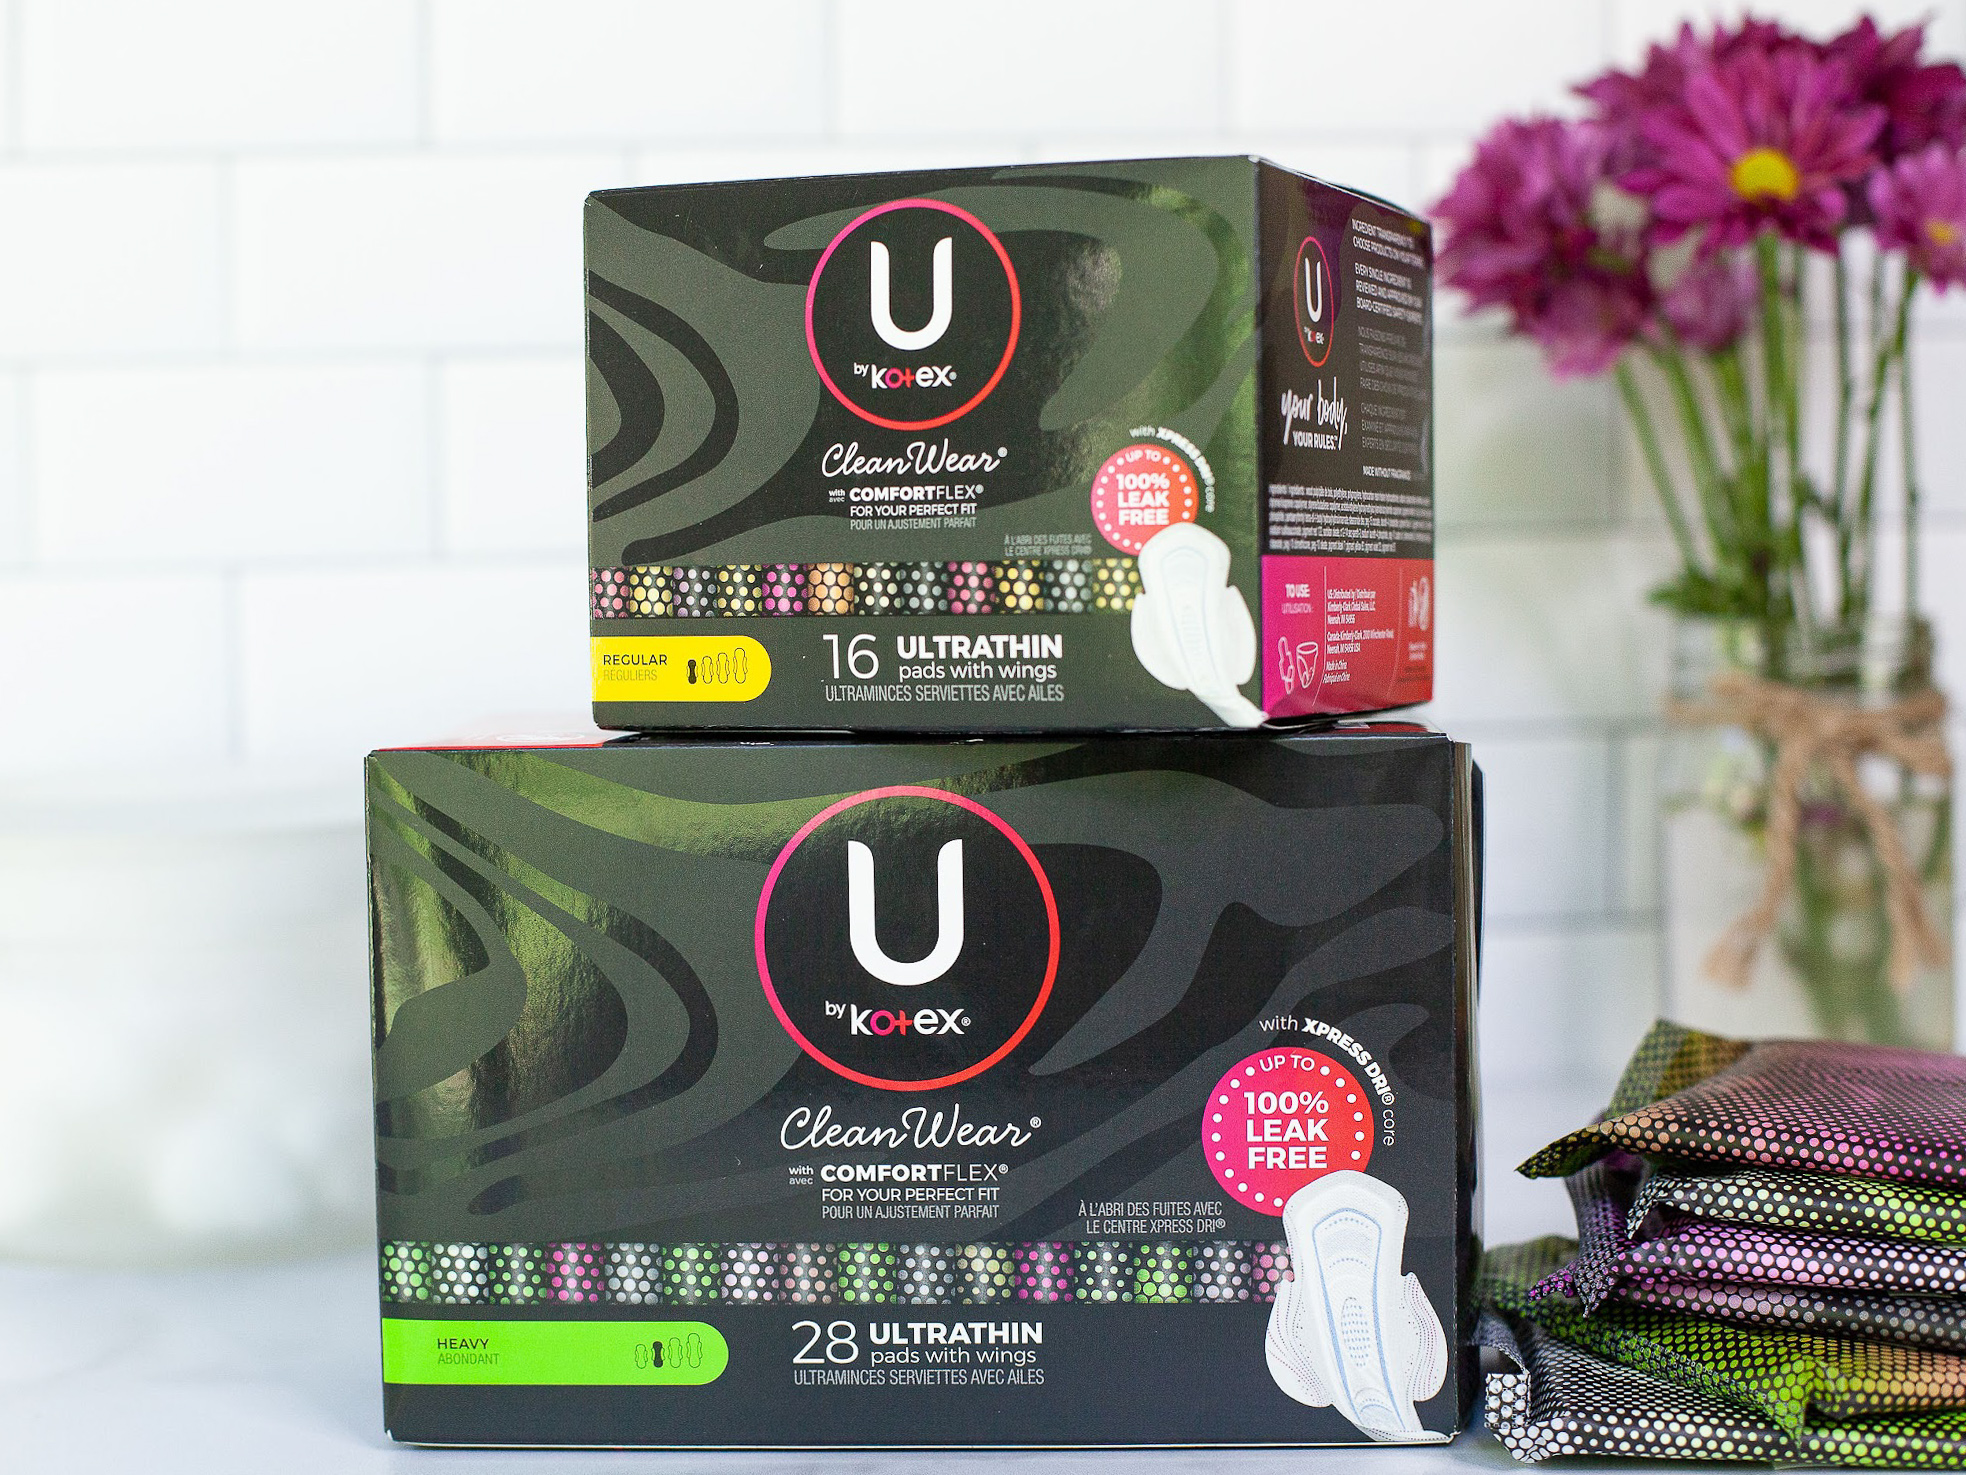 U By Kotex Products As Low As 99¢ At Kroger